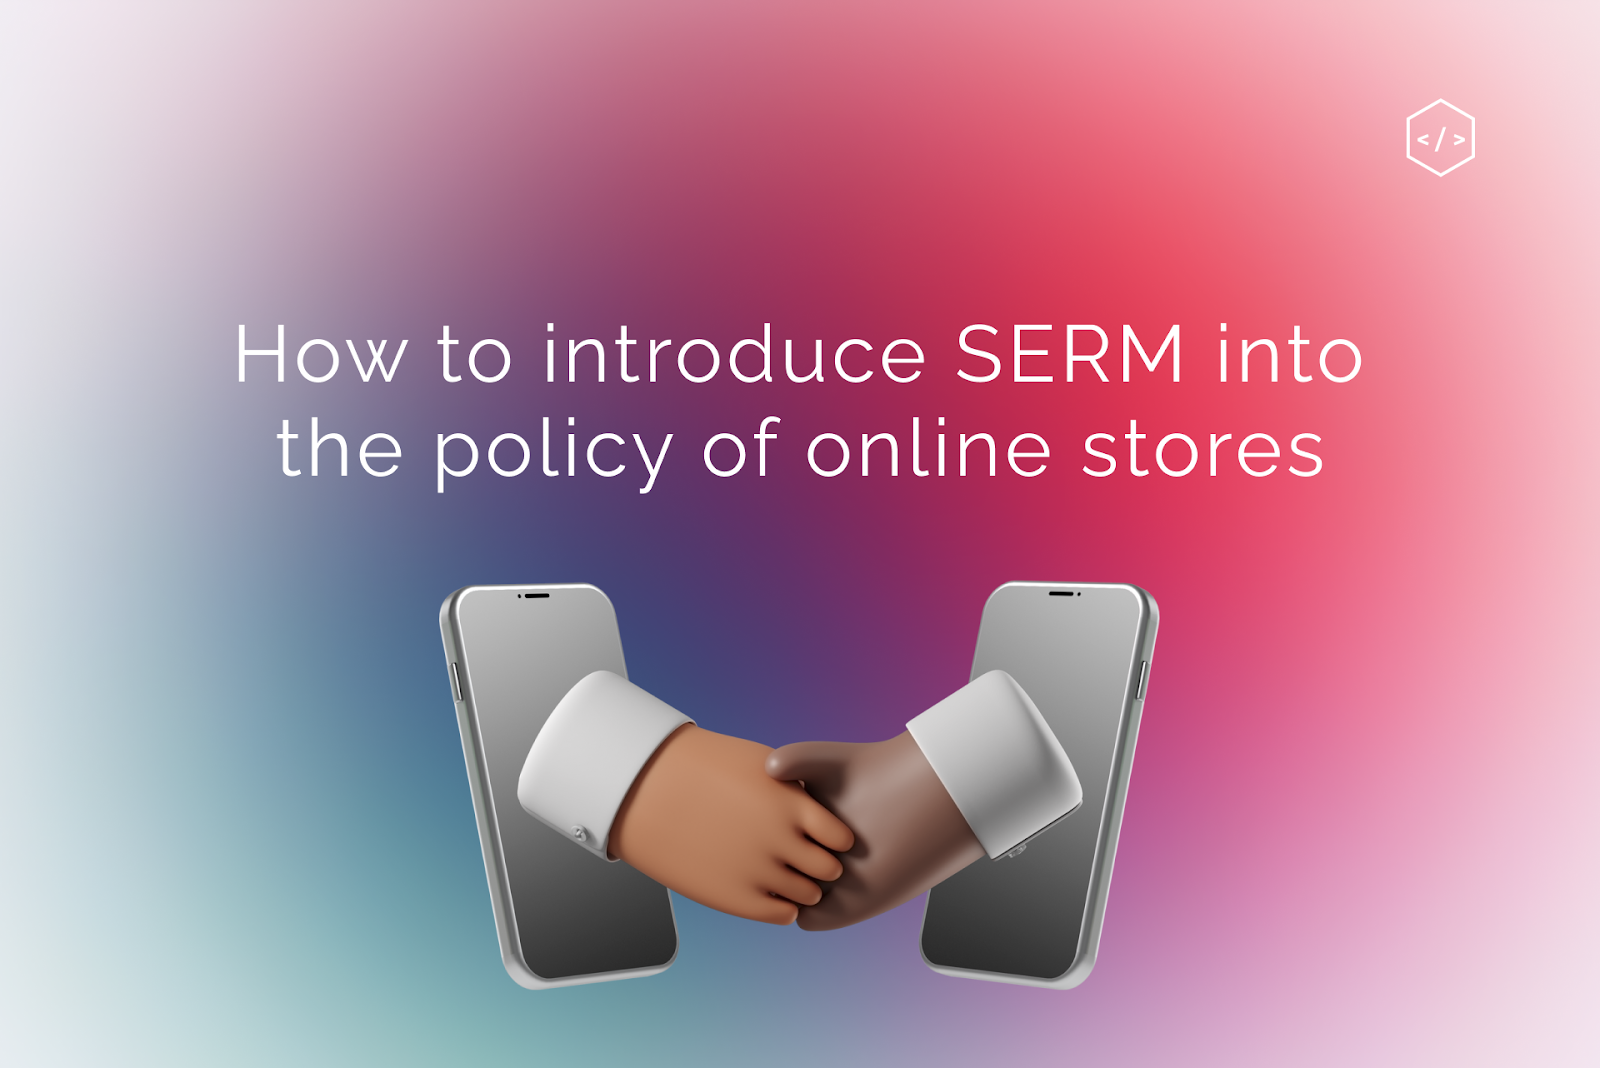 SERM and work with the reputation of Internet business